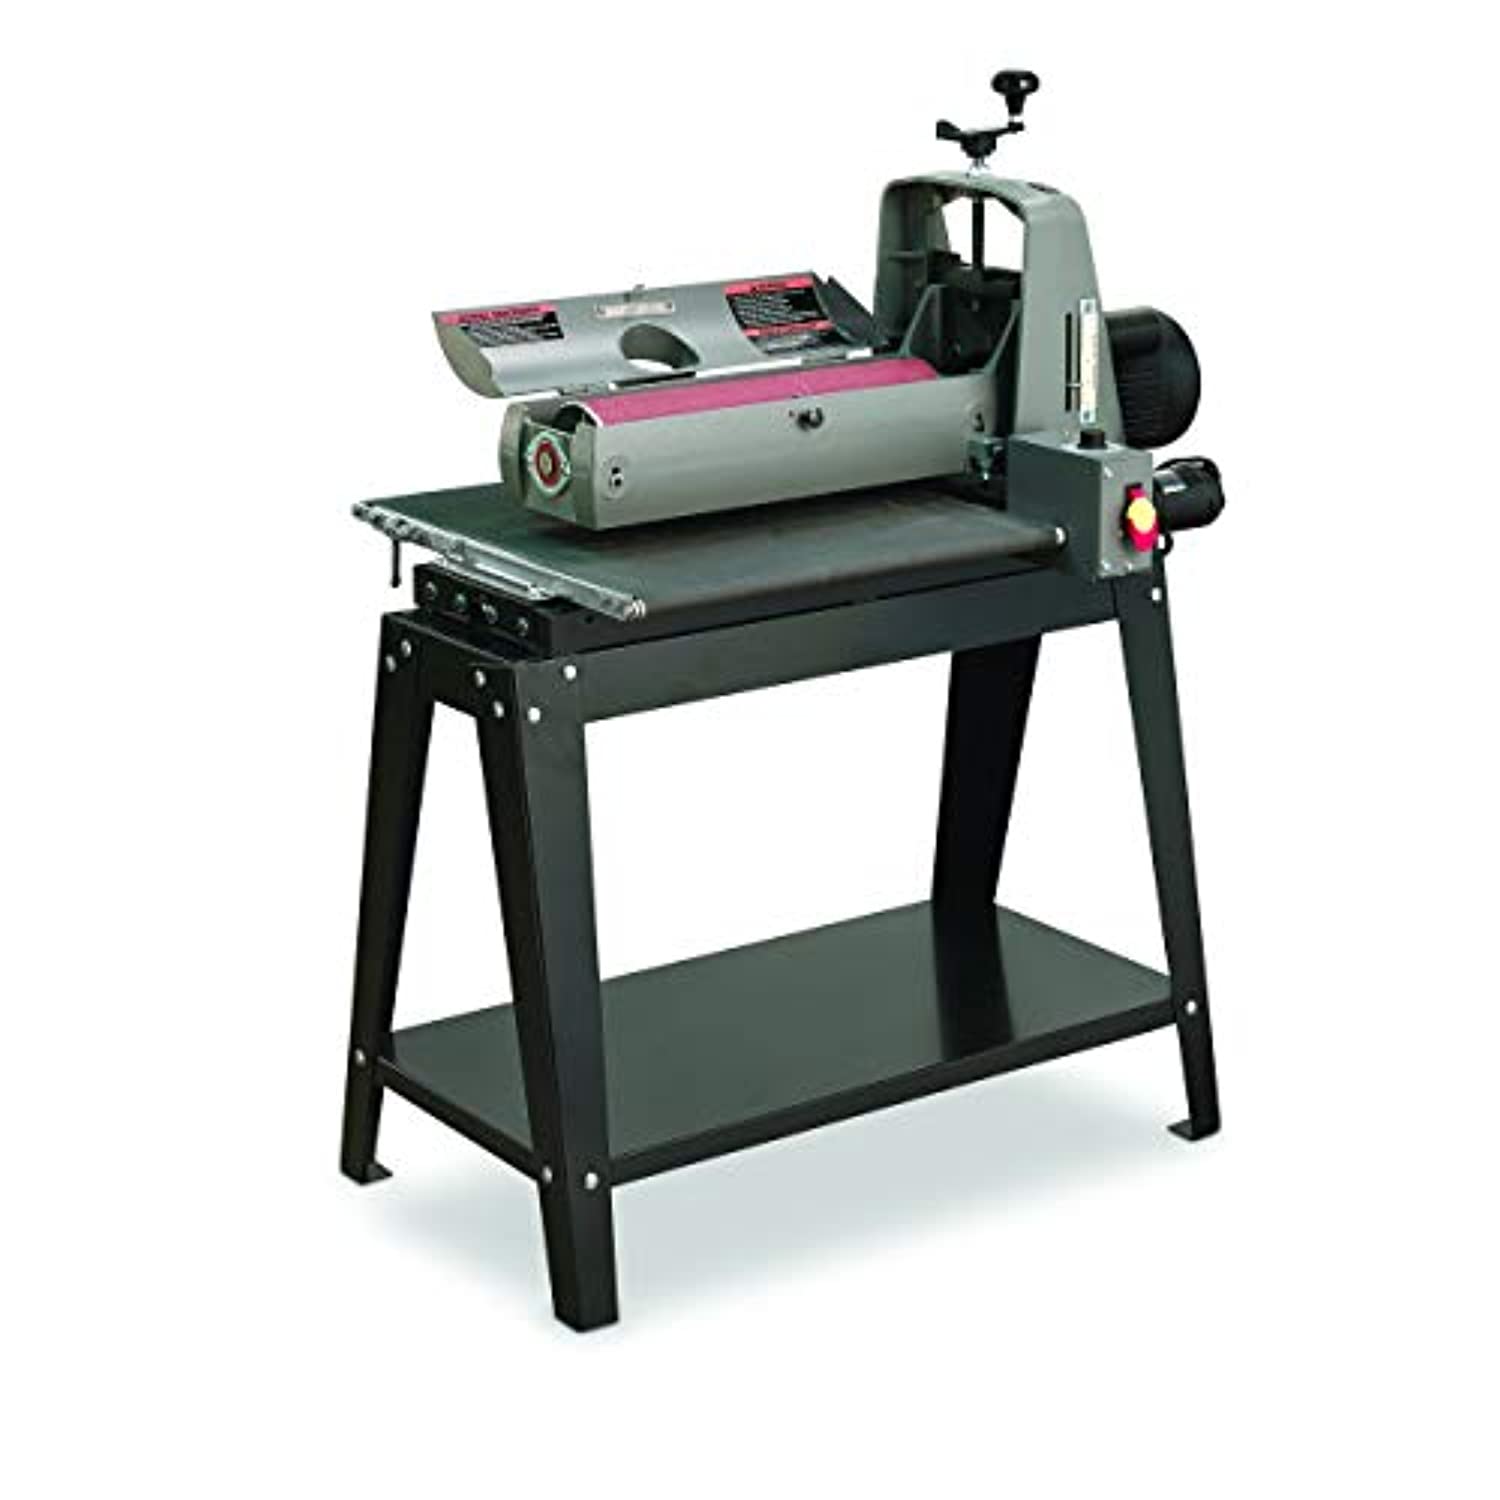 SUPERMAX TOOLS Drum Sander with Flatness Guarantee, Intellisand Technology and Patented Abrasive Attachment System. Model 19-38 (SUPMX-71938-D)